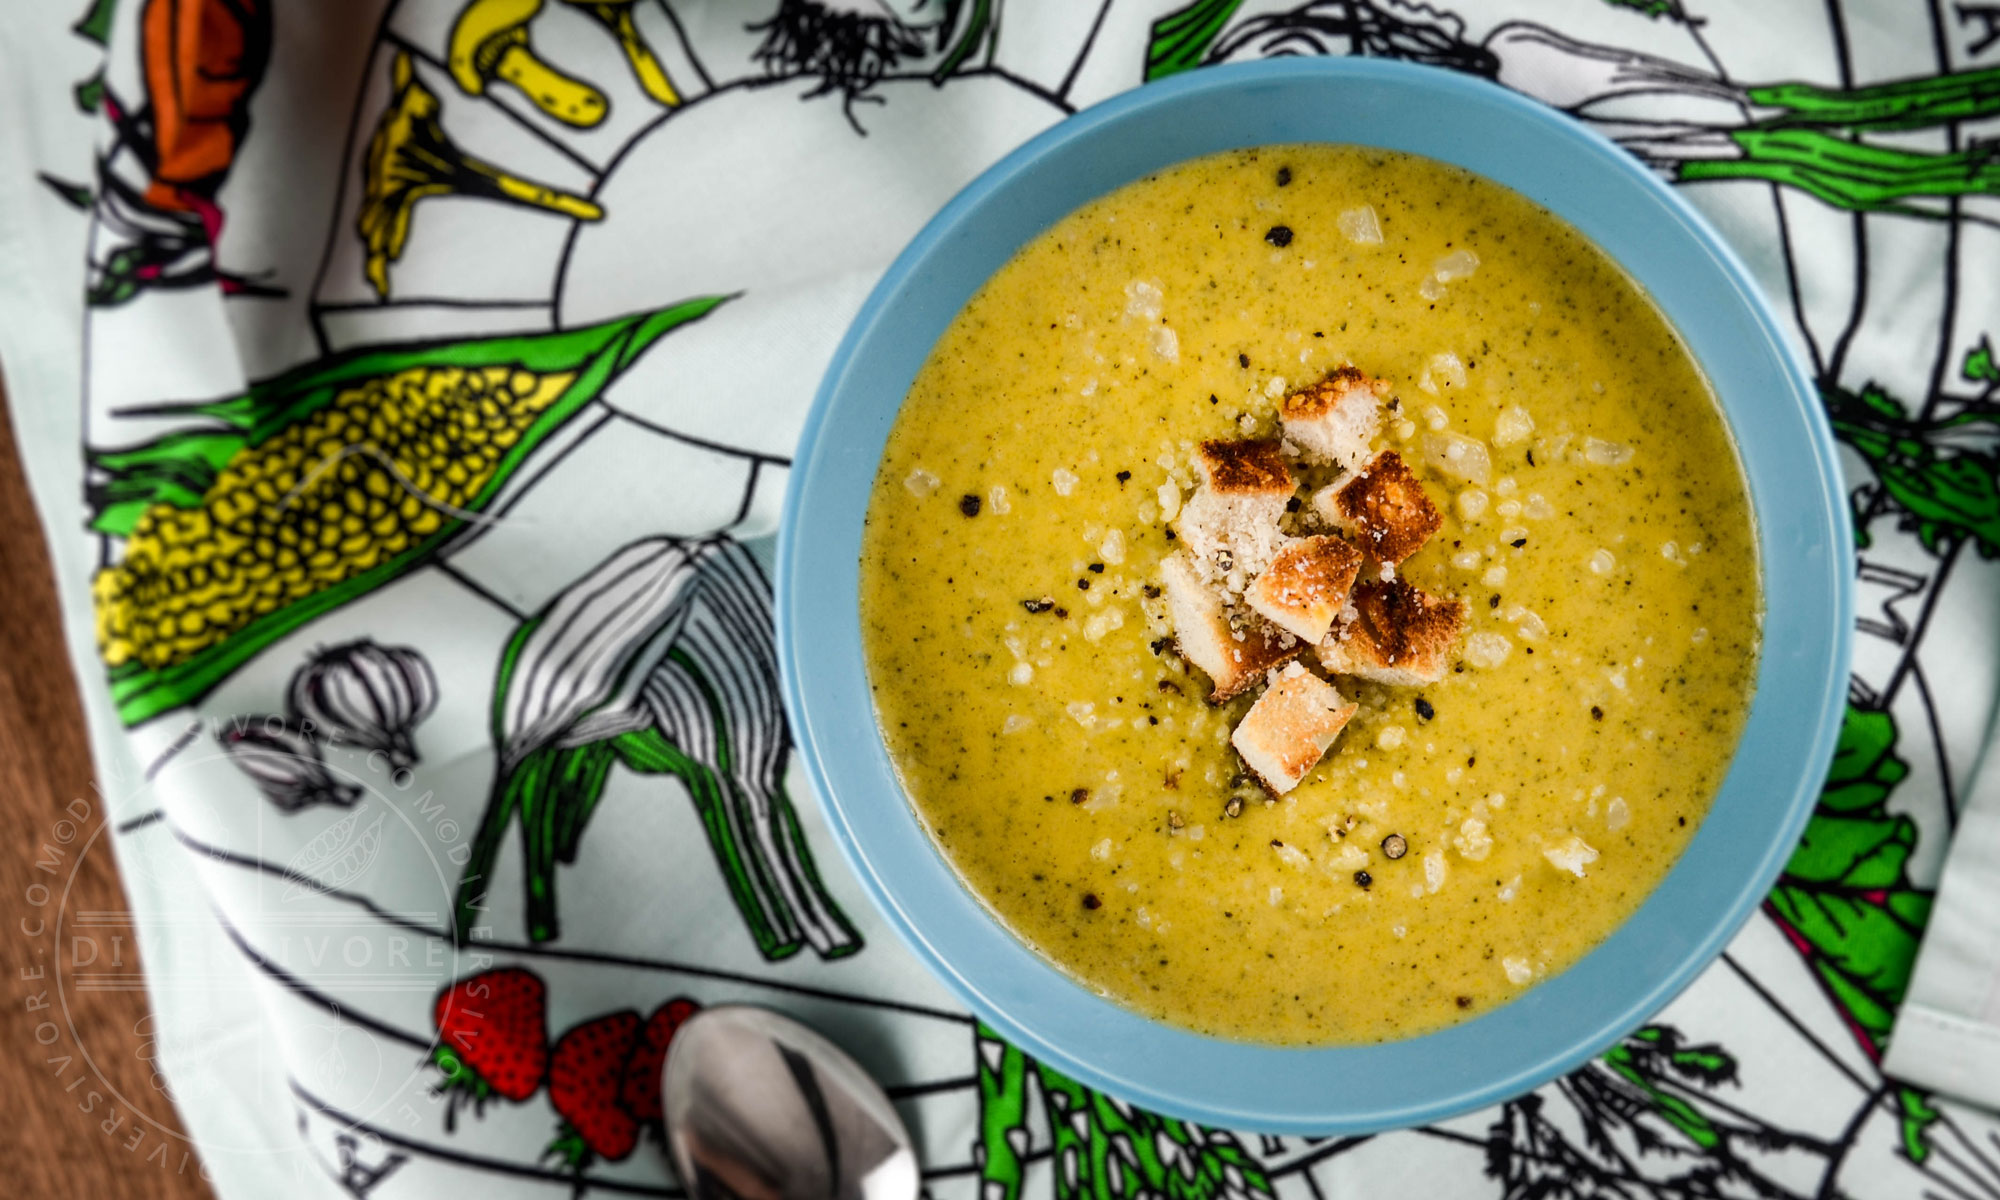 Featured image for “Healthier Broccoli & Cheddar Soup”